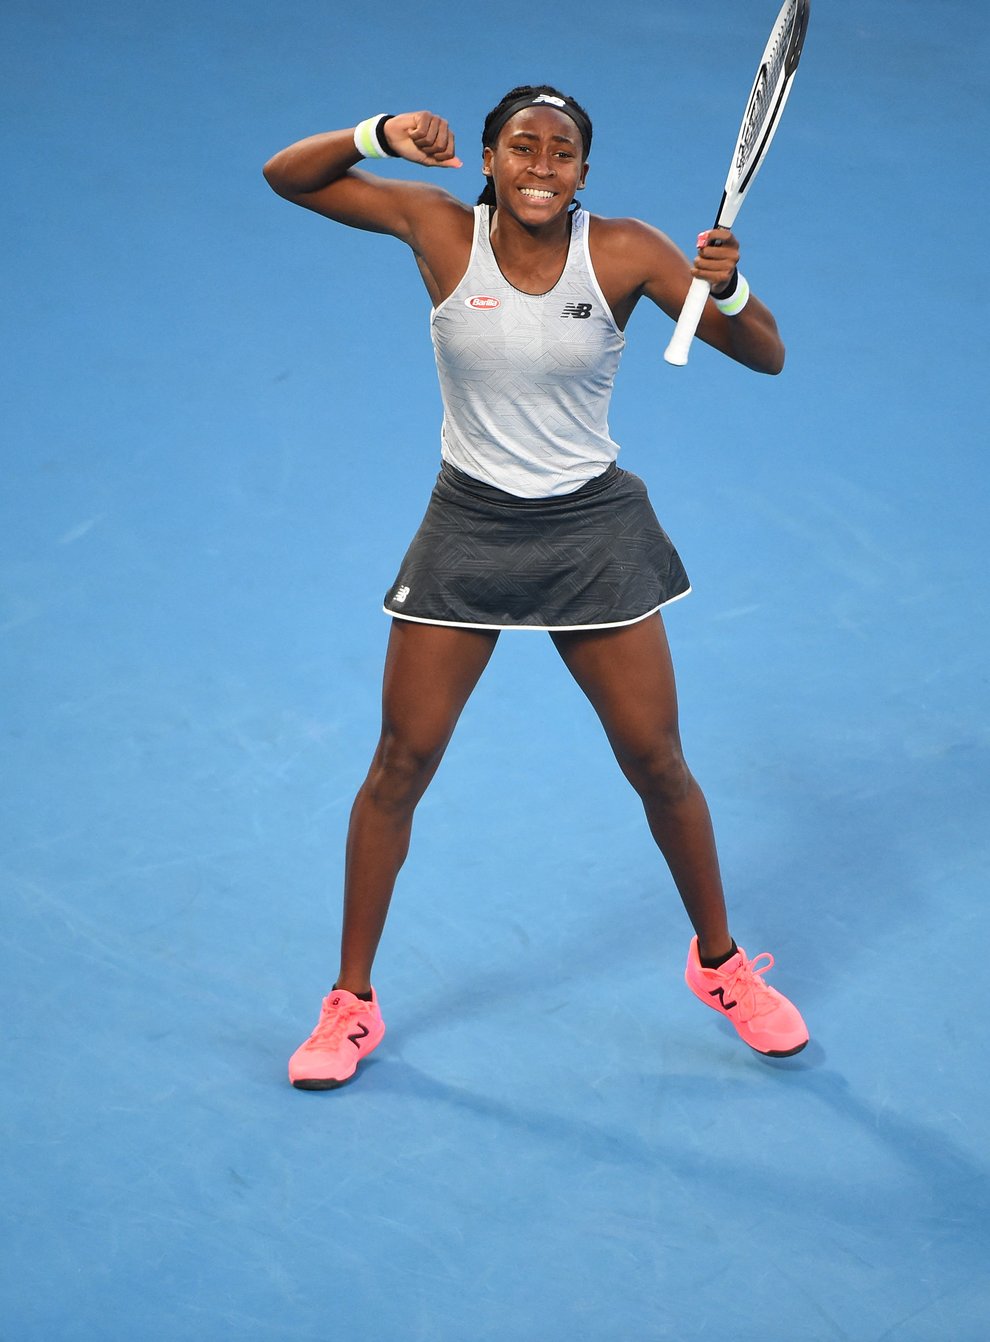 Gauff celebrates on her way to the fourth round at the Australian Open 2020 (PA Images)